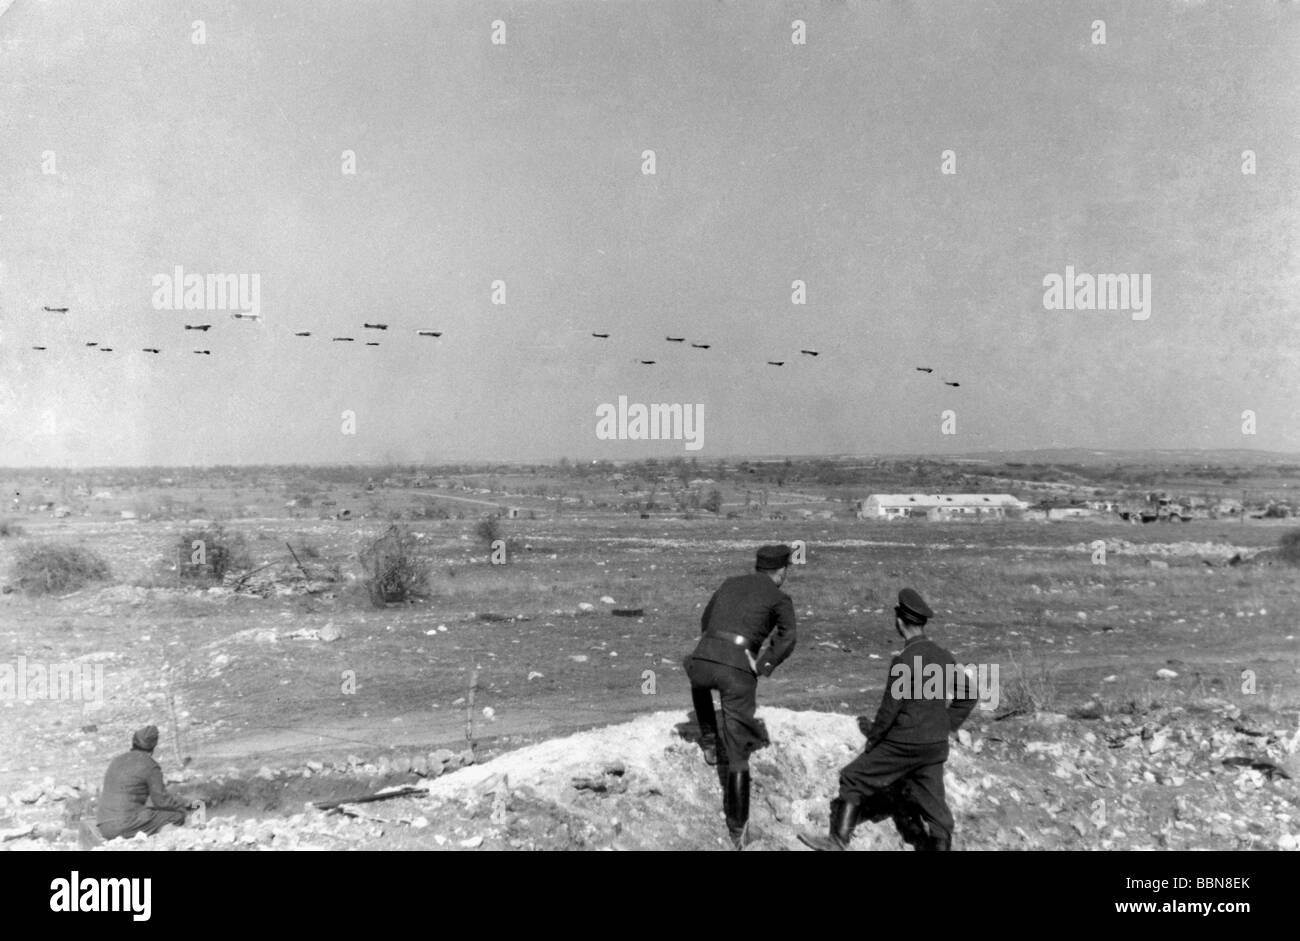 events, Second World War / WWII, Russia, aerial warfare, German aircraft formation over the Crimea near Sevastopol, 26.4.1944, Stock Photo